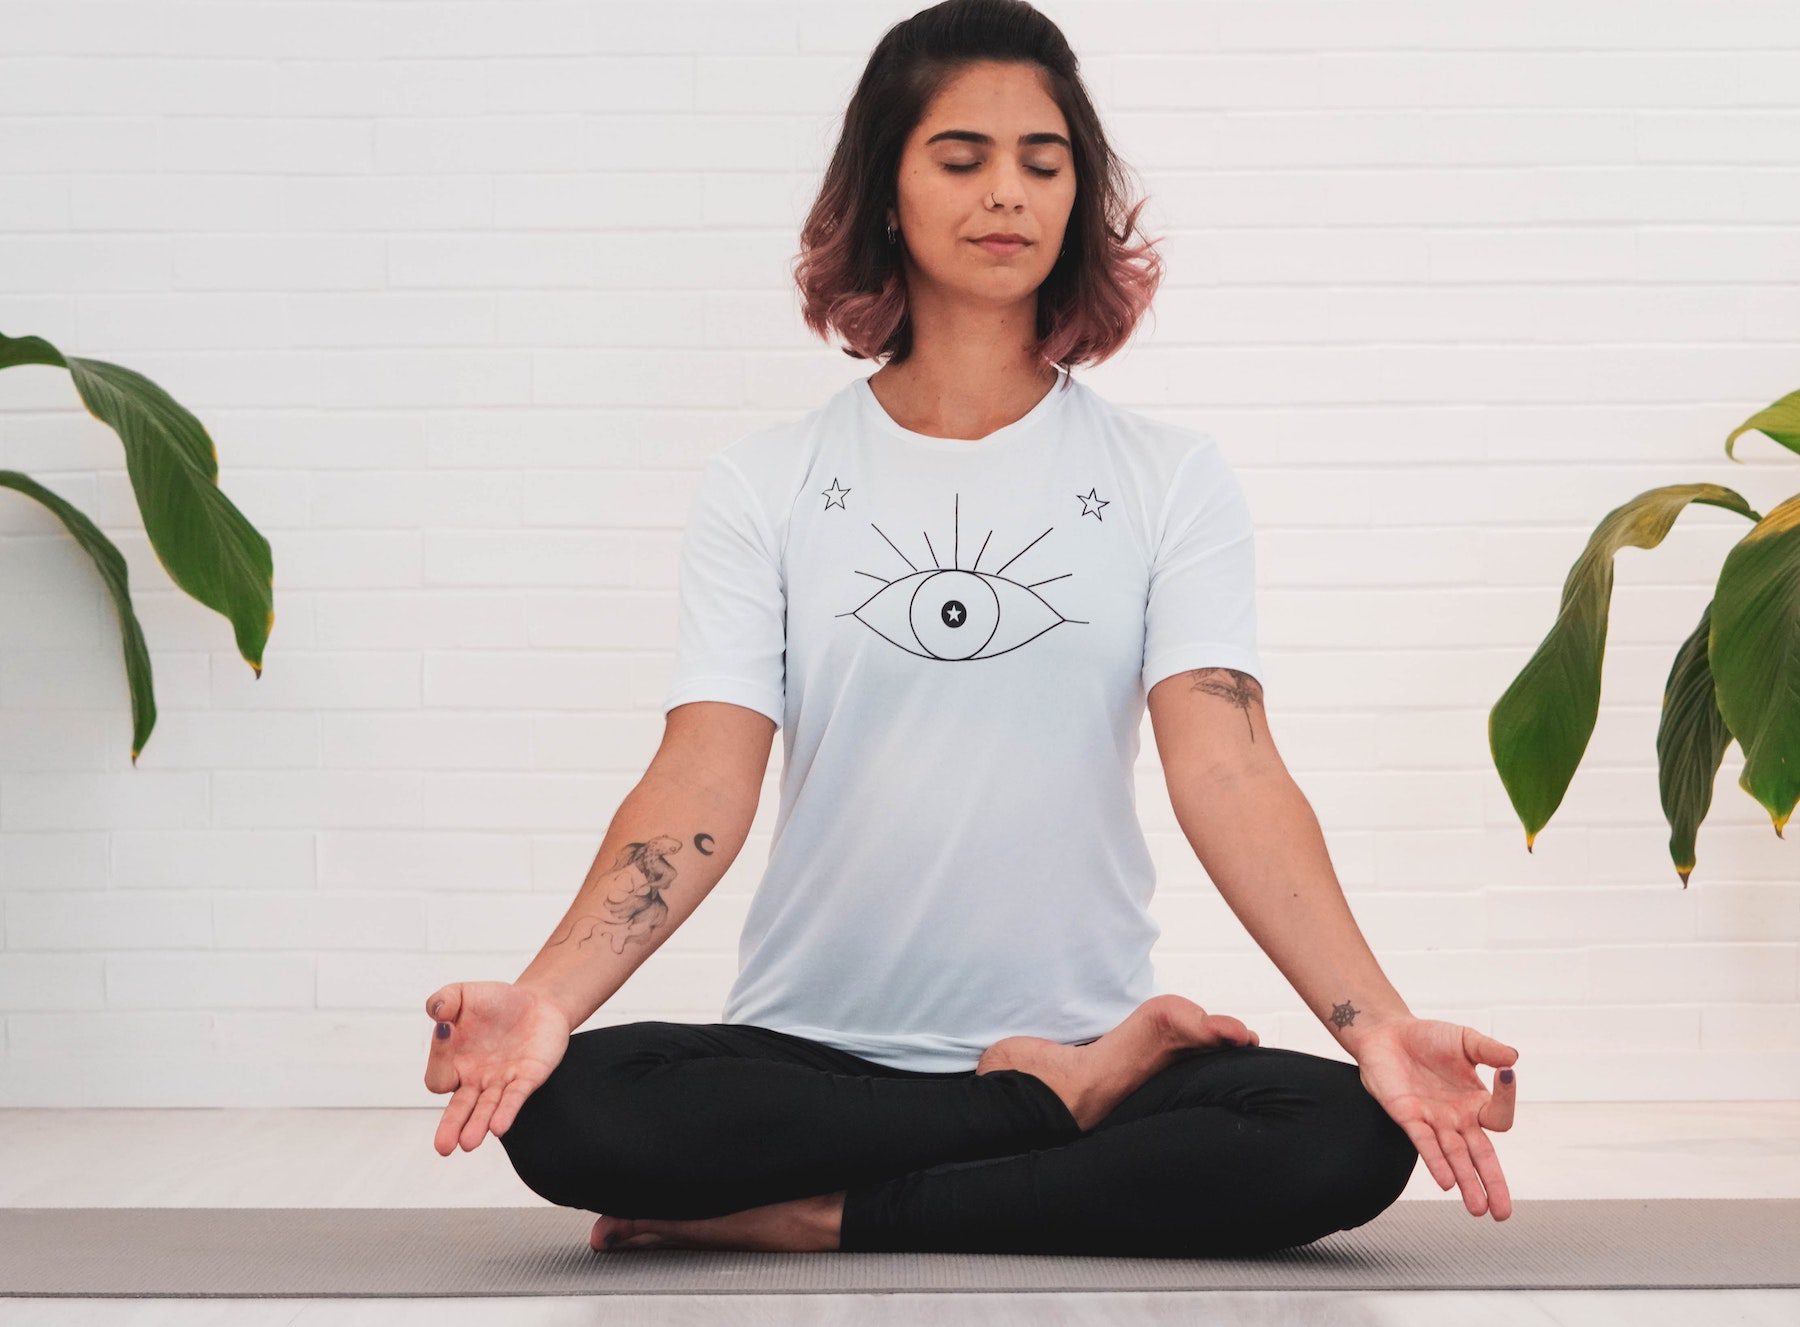 Peaceful and calm woman in white tee and black pants meditating while sitting cross-legged.